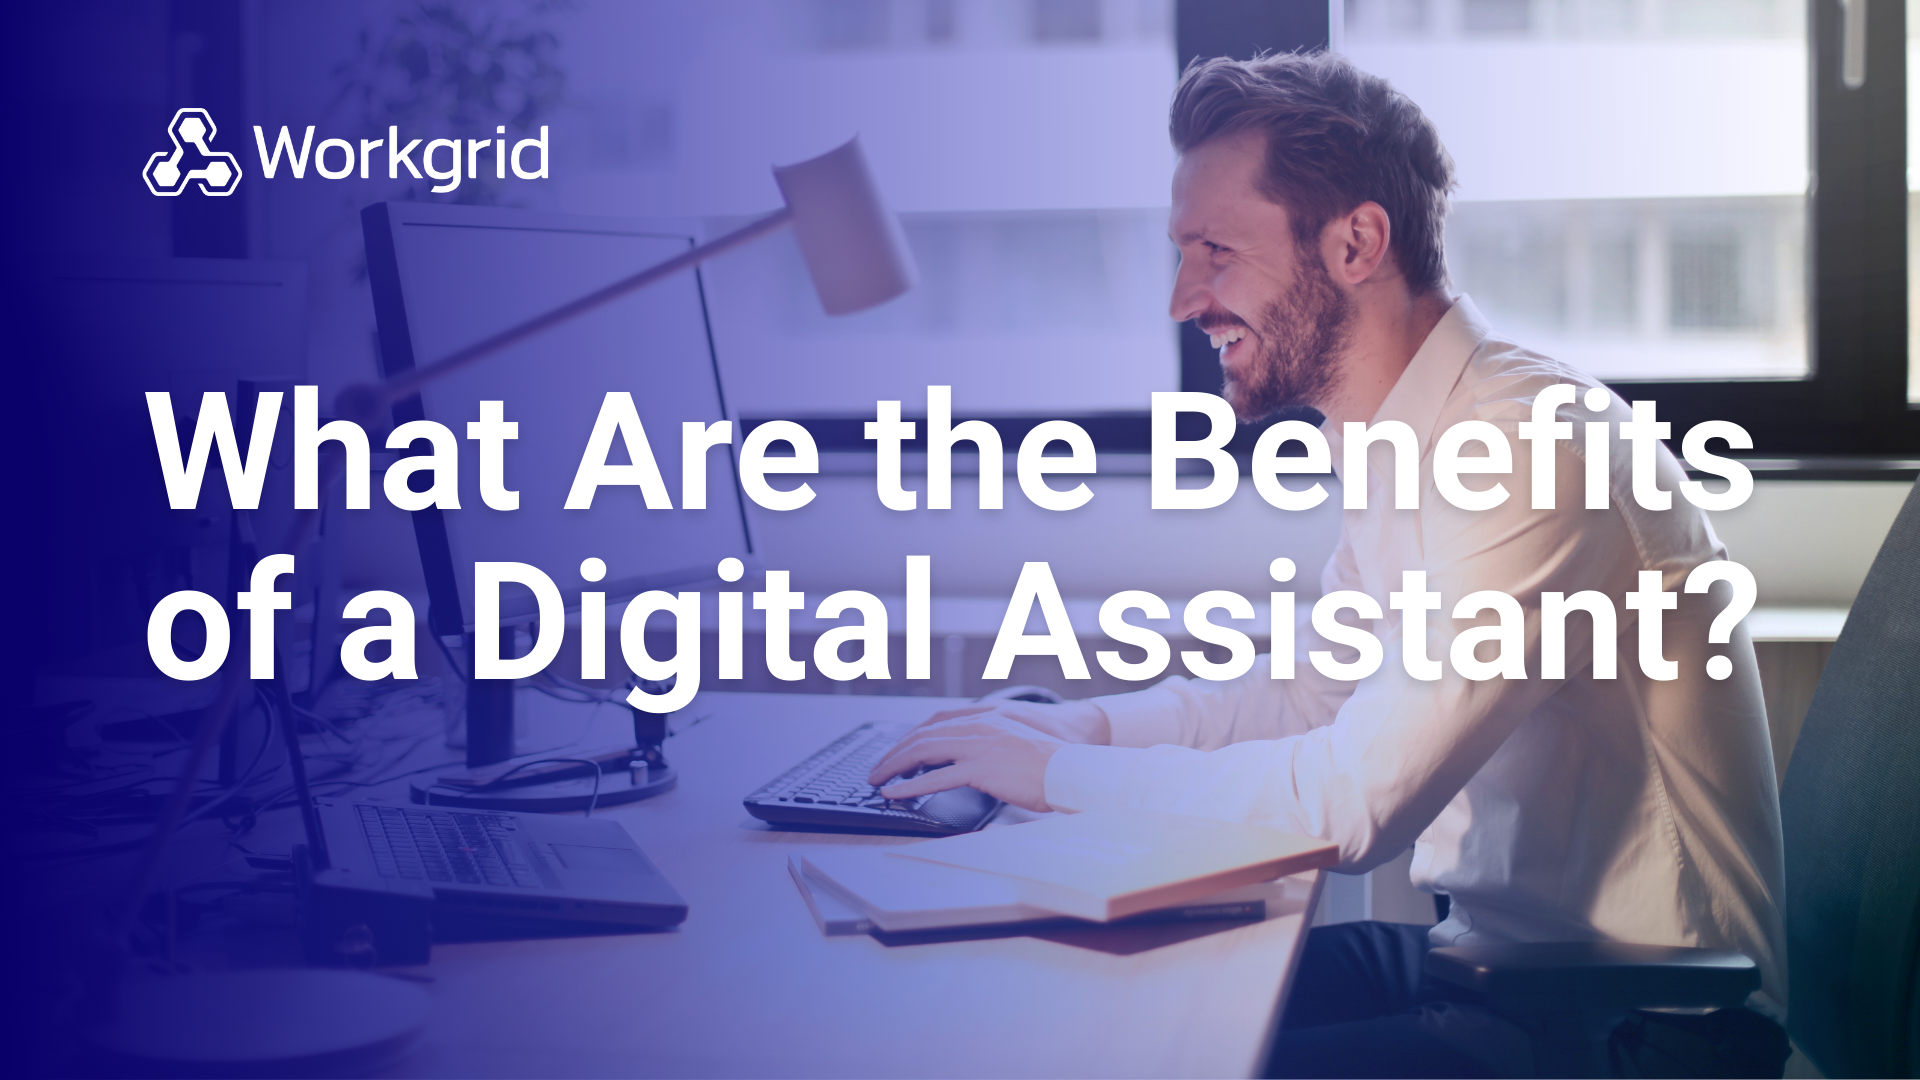 What are the Benefits of a Digital Assistant?